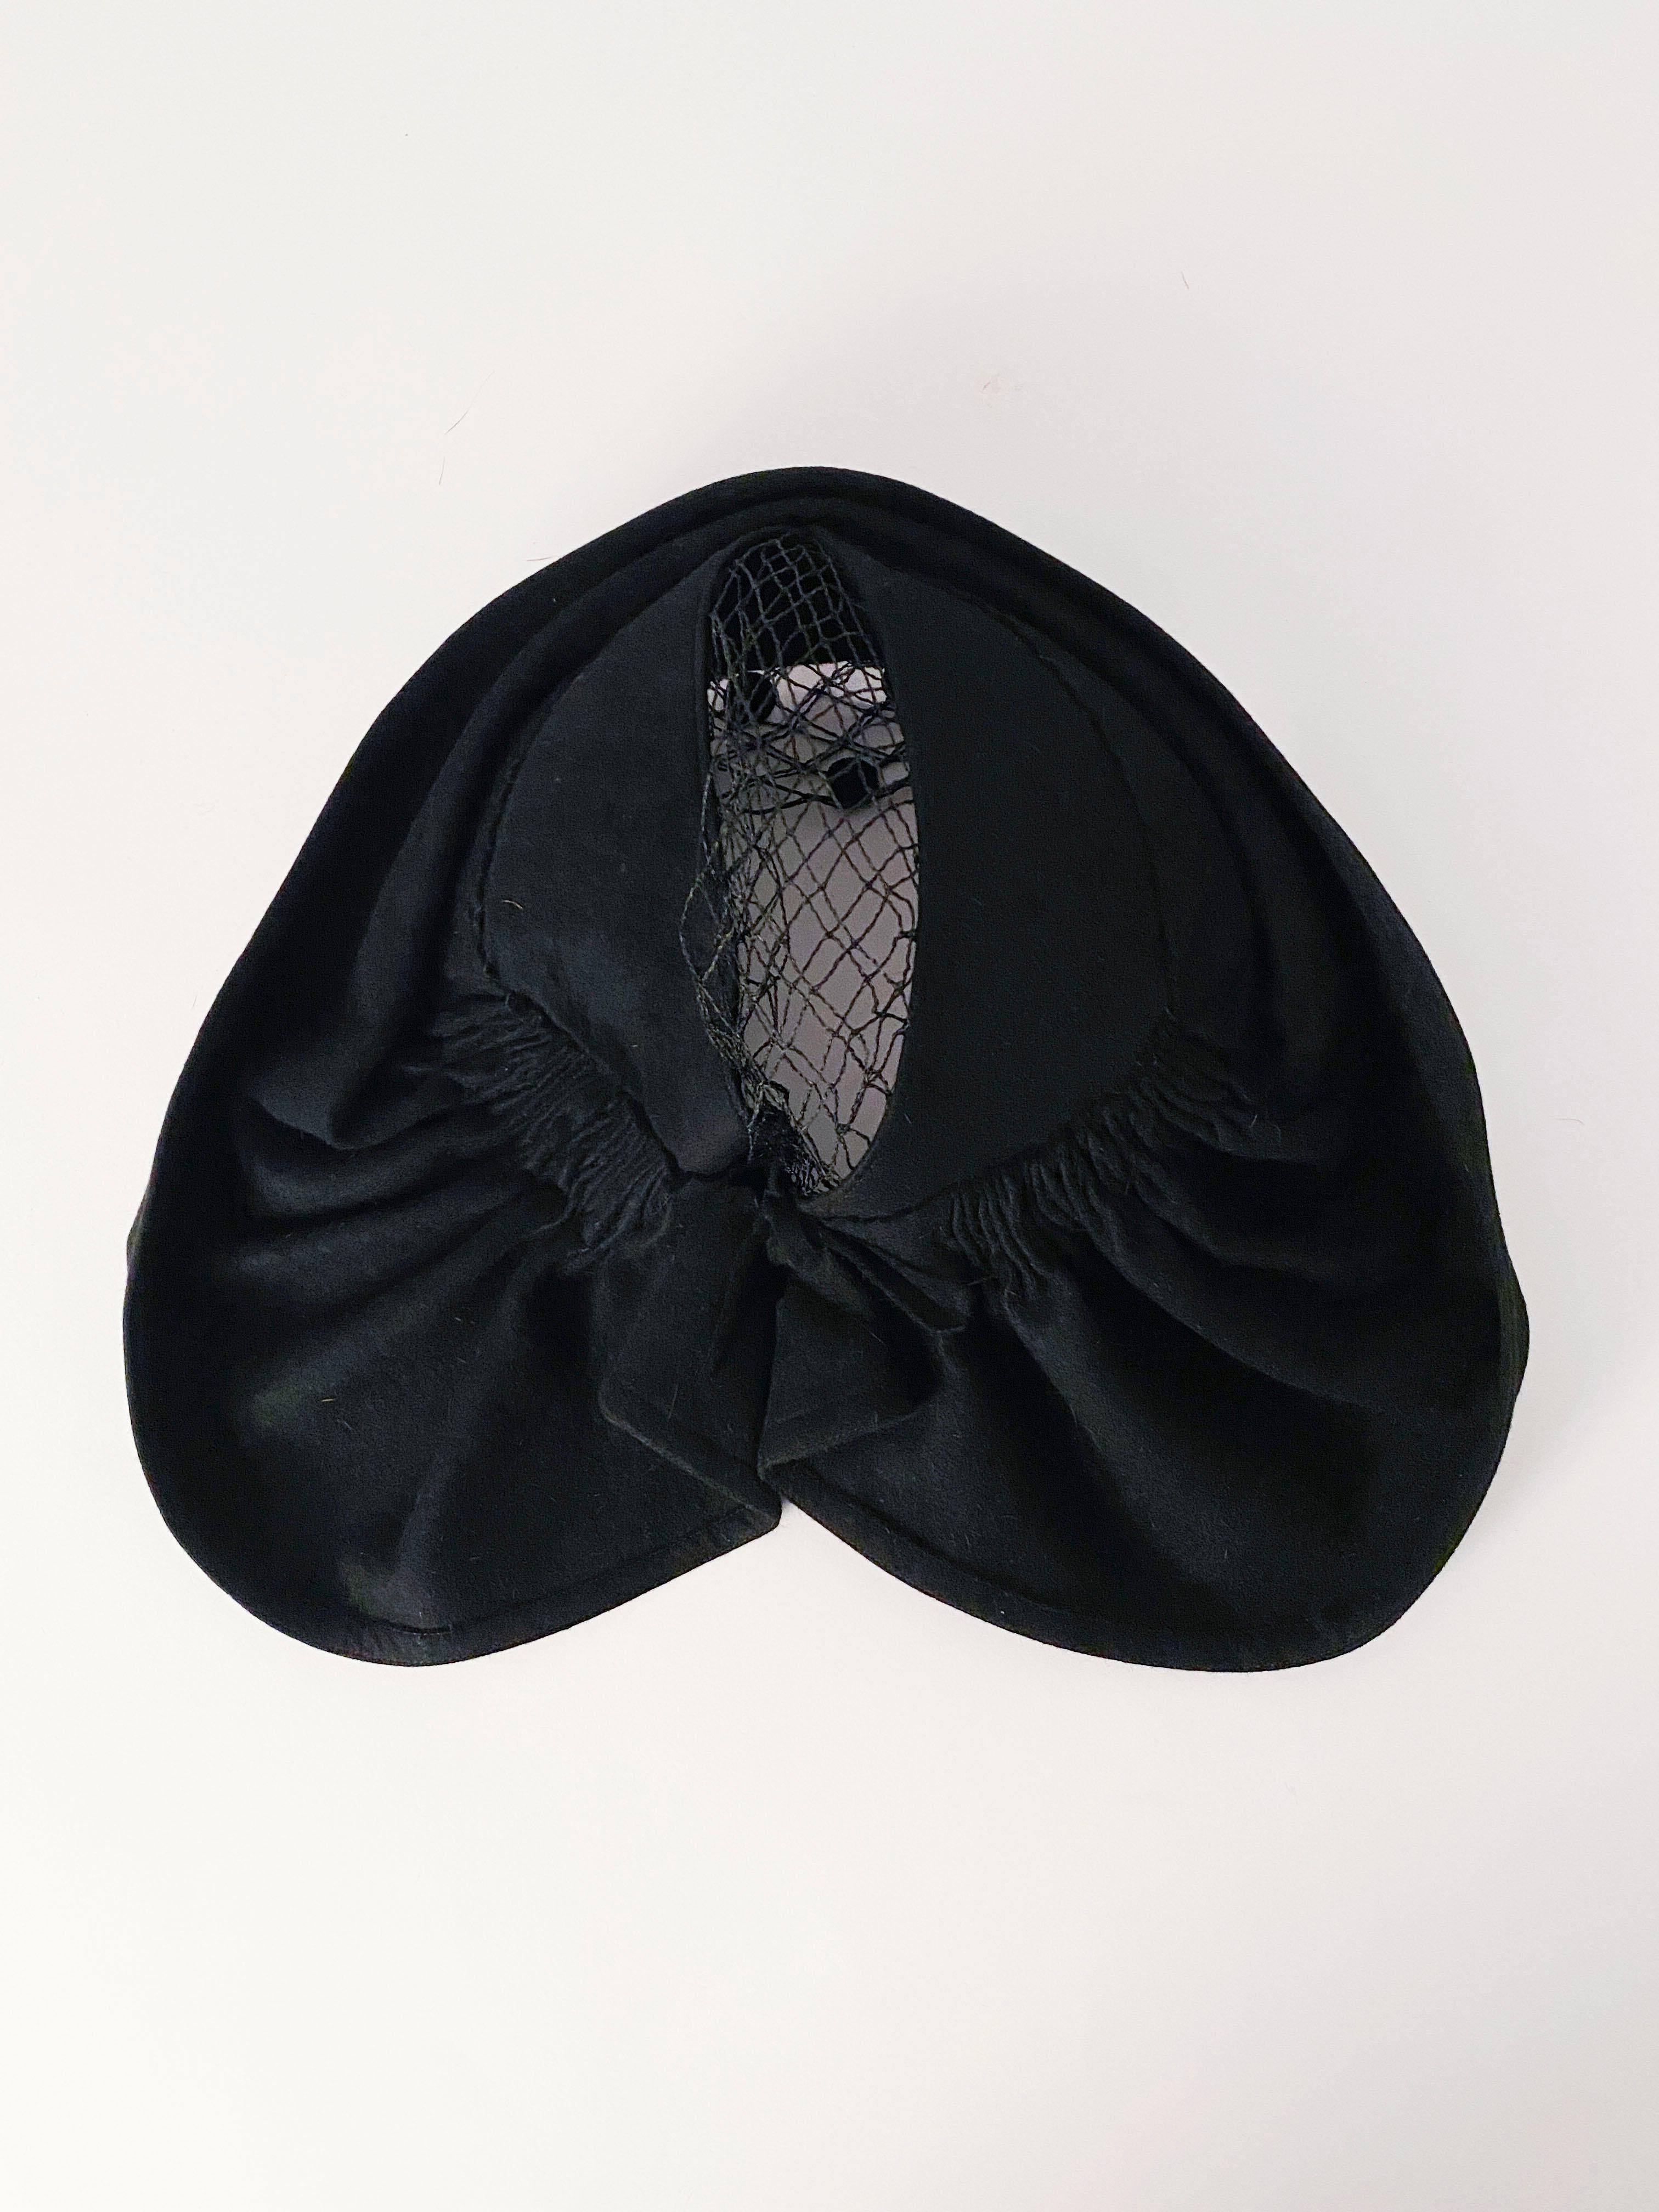 1930s Black Felt Hat with Netting and Back Details 1